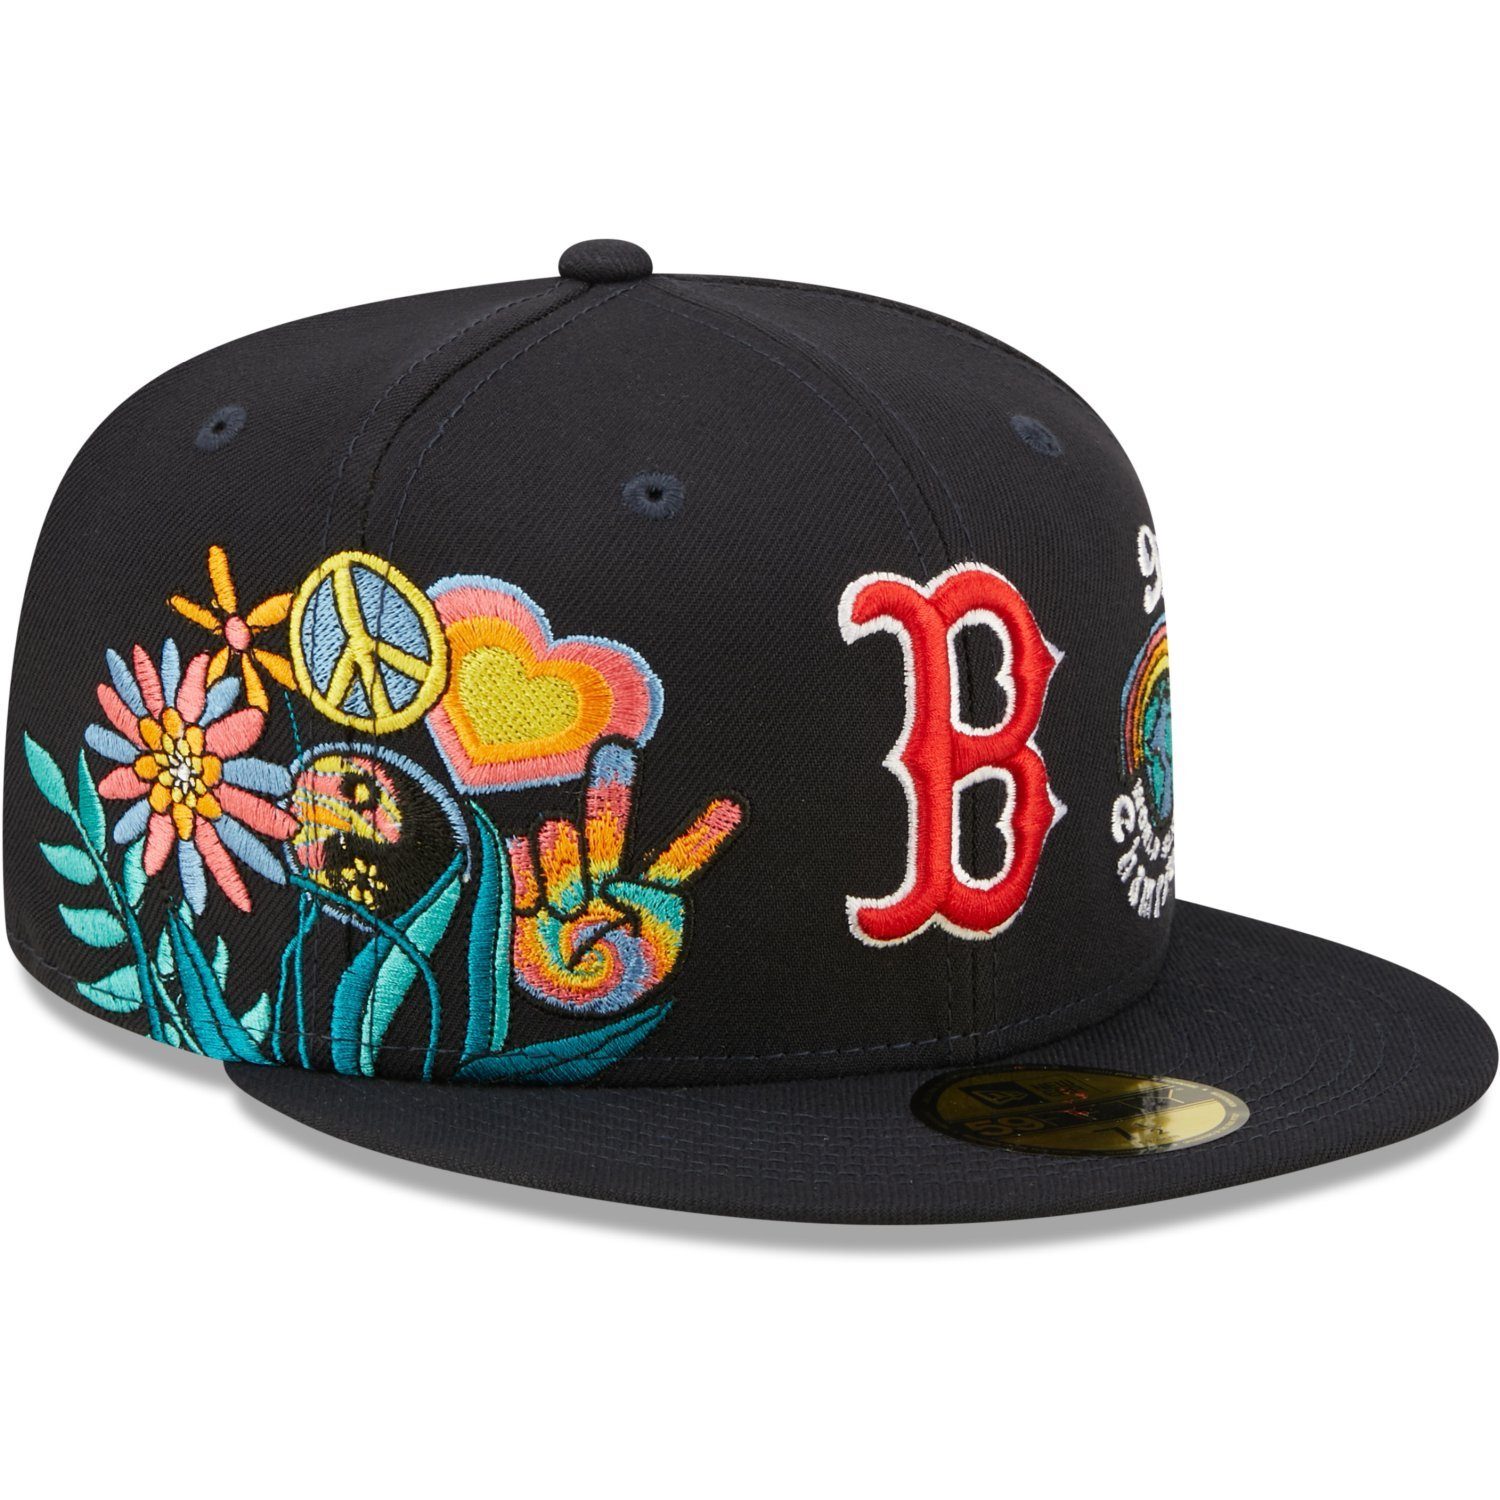 New Era Fitted Cap 59Fifty GROOVY Boston Red Sox